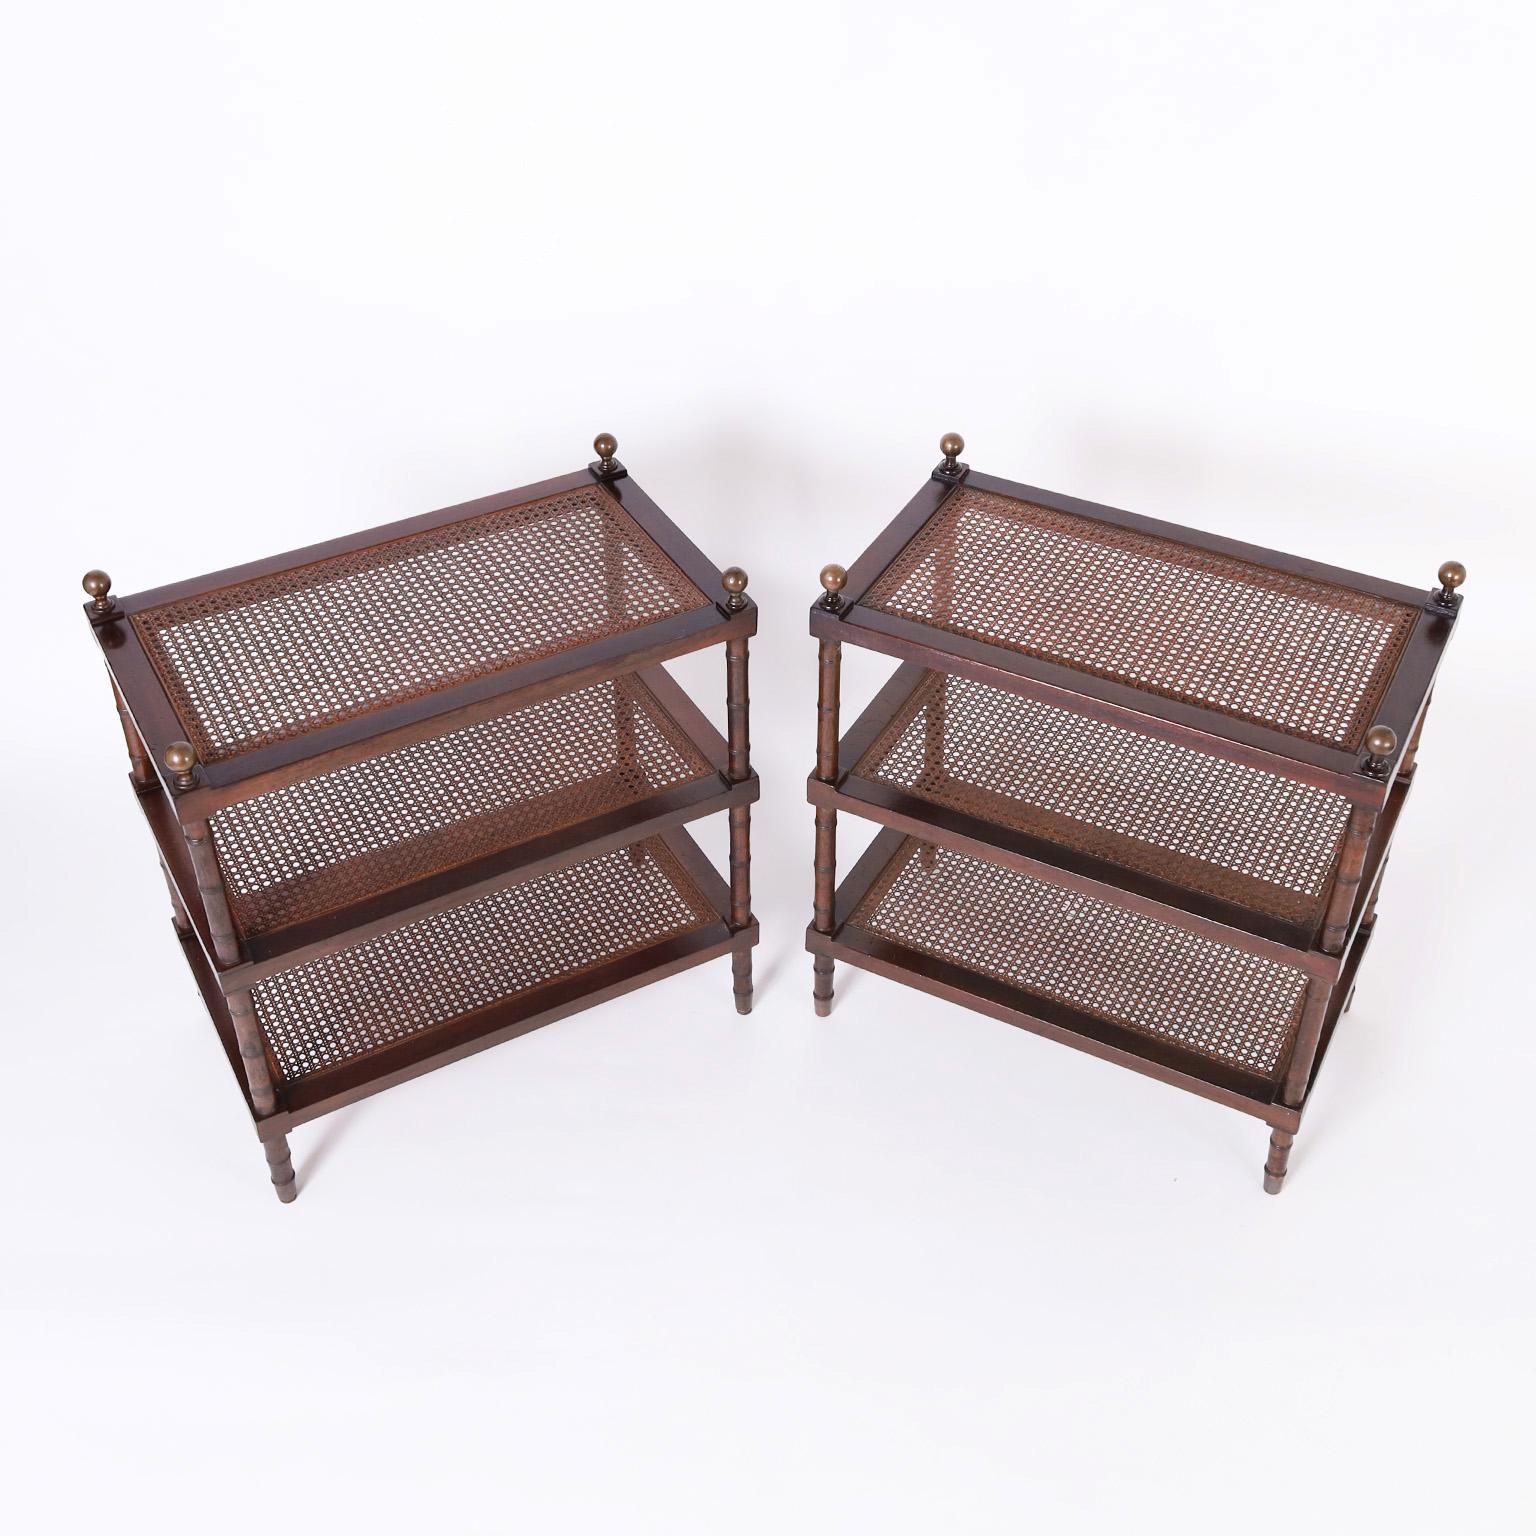 American Pair of British Colonial Style Three Tiered Stands